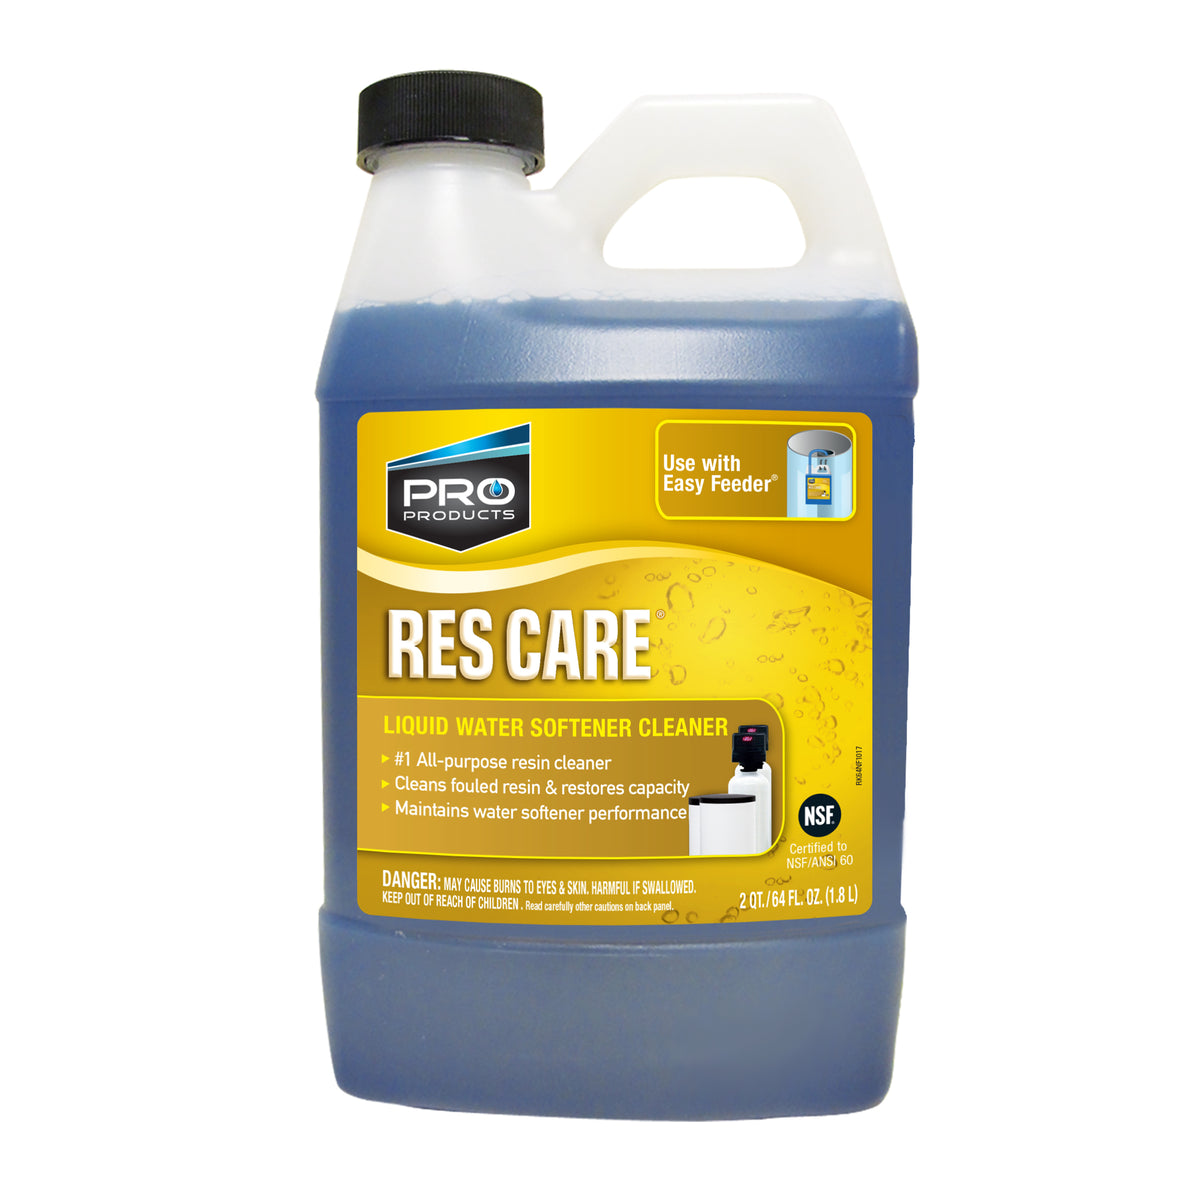  Res Care Liquid Water Softener Cleaner – Cleans Fouled Resin –  Restores Softener Efficiency – Restores Resin Capacity – Extends Water  Softener Life – Removes Contaminants : Health & Household